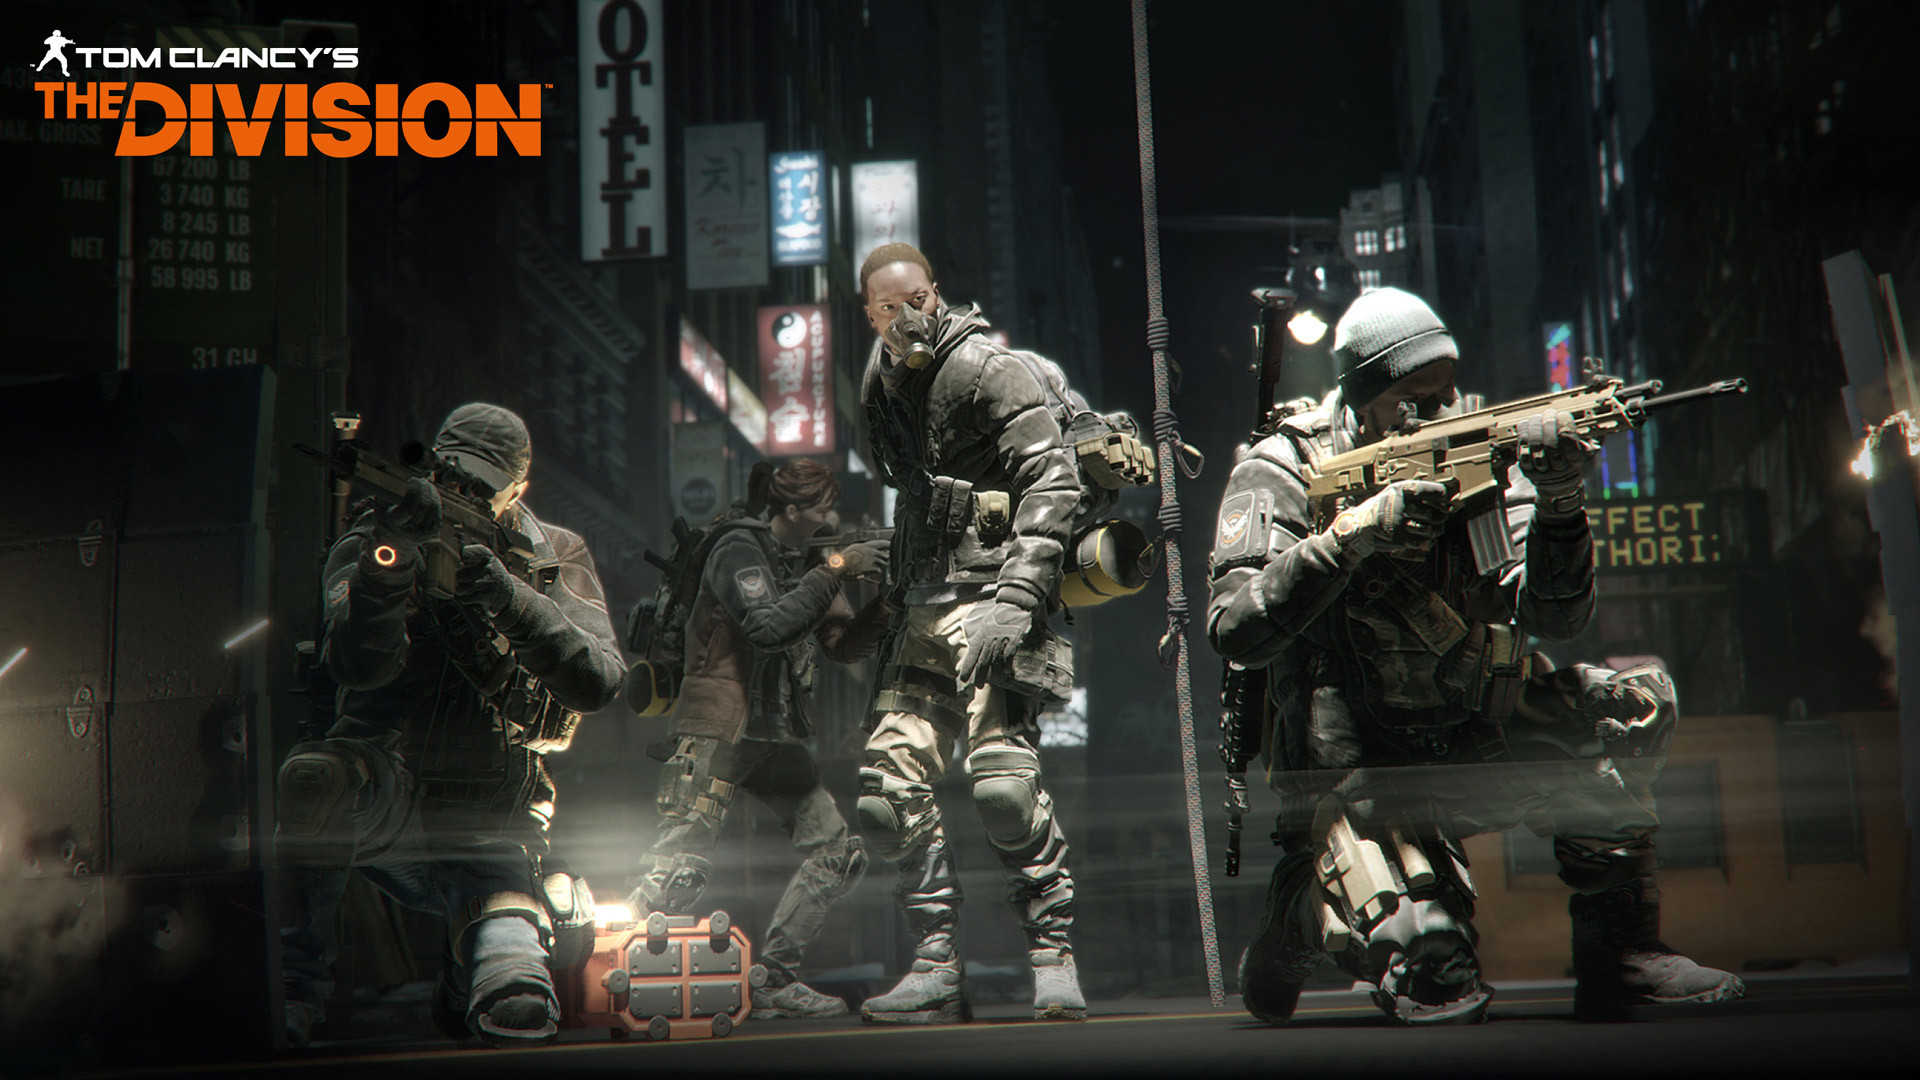 1920x1080 The Division Wallpaper in 